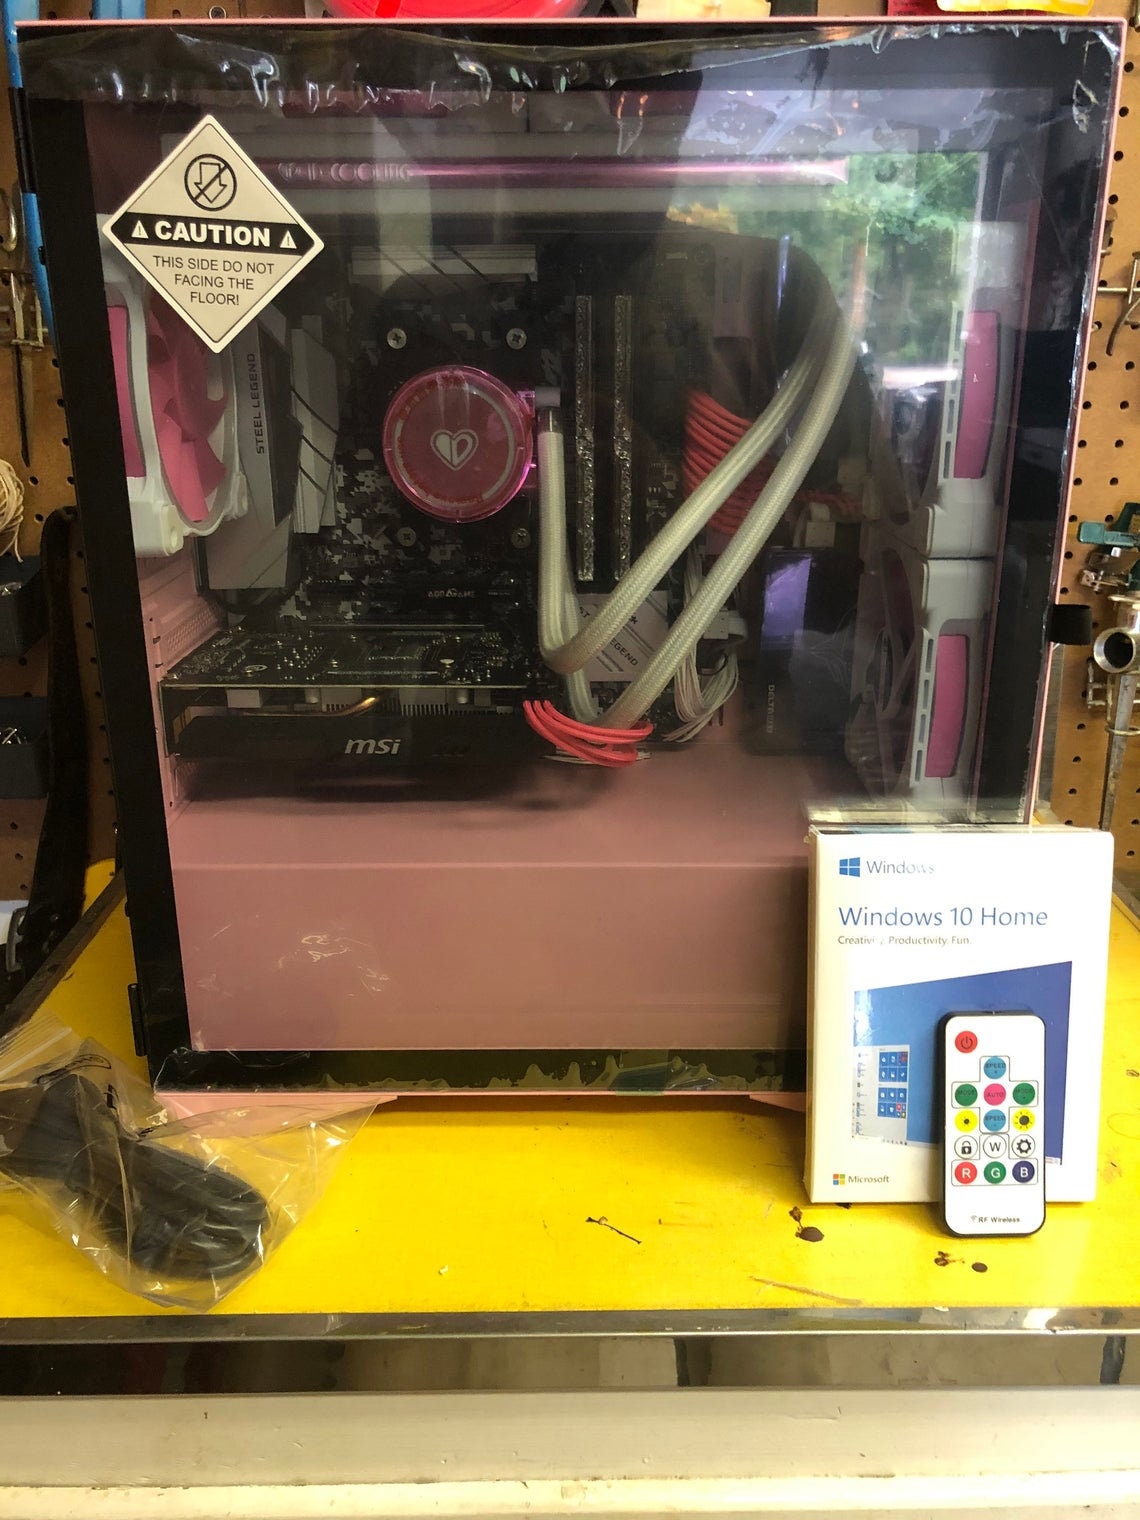 Original Evelynne ® - The Pink Gaming Computer - Pink PC